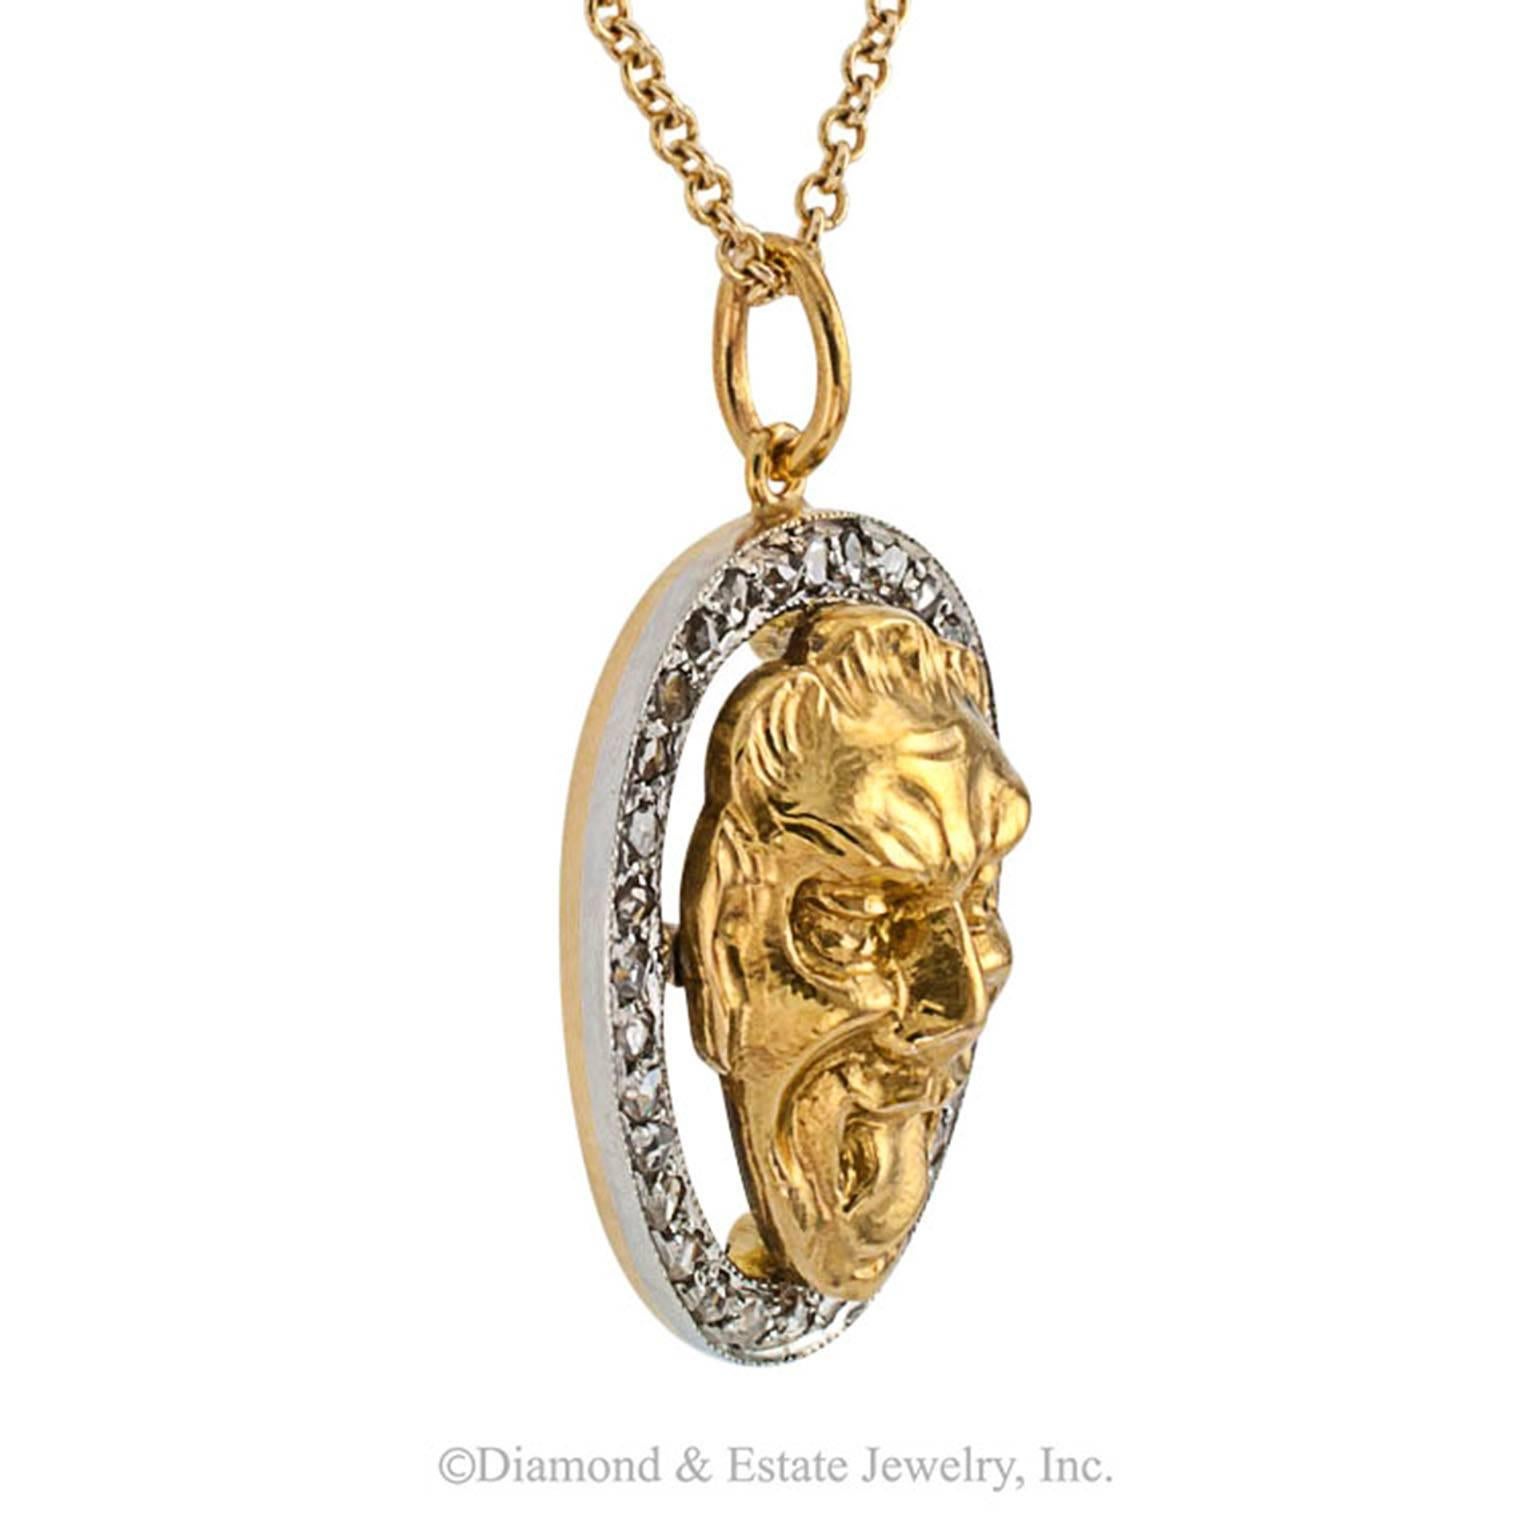 Art Nouveau Gold Platinum and Diamond Face Pendant

Packs a punch in spite of its dainty proportions, the pendant centers upon a bright, 18 karat gold, androgynous face inhabited by an expression of intense elation, excitement and happiness,